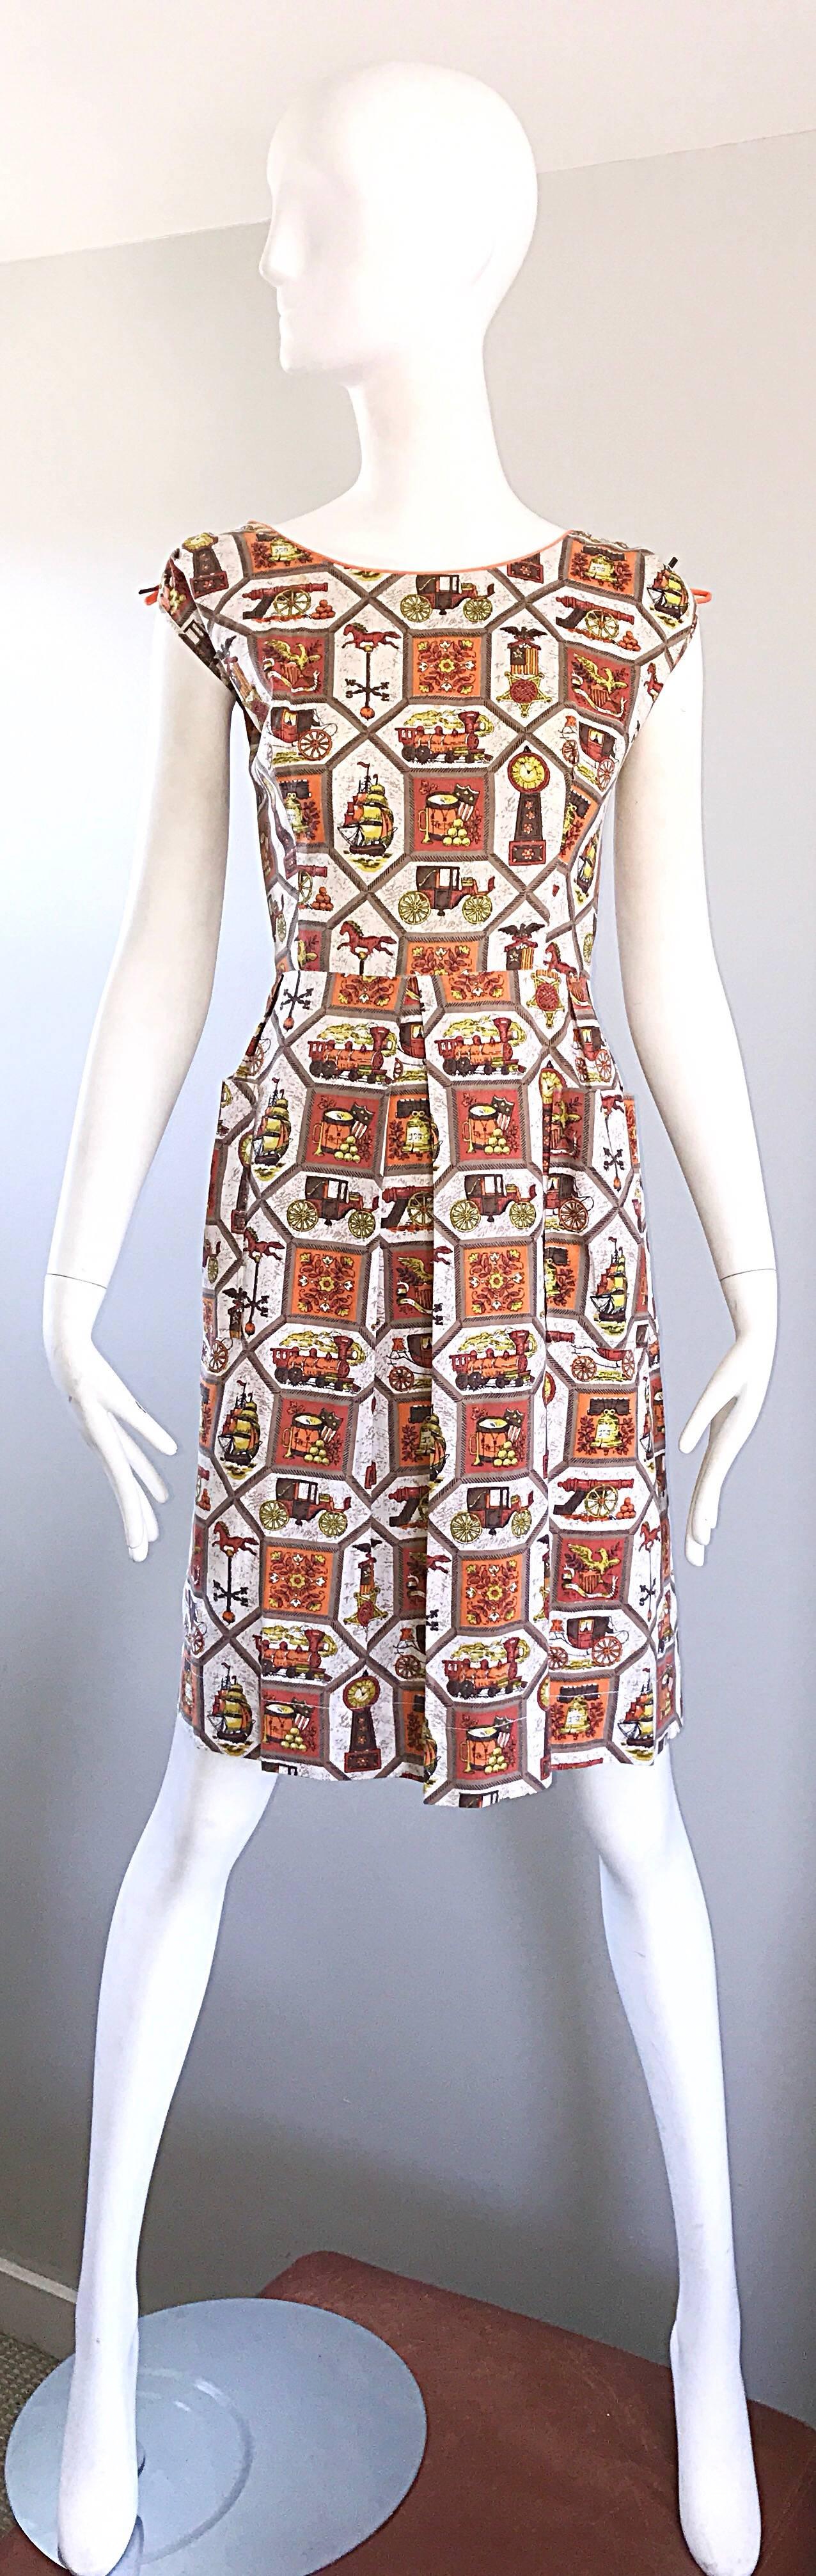 Chic and rare larger plus size 1950s novelty cotton dress! Features whimsical prints of trains, toy horses, drums, clocks, flowers, ships, cannons, crests, etc. Vibrant colors of orange, brown, yellow, gold, brown and burnt orange throughout. Bright